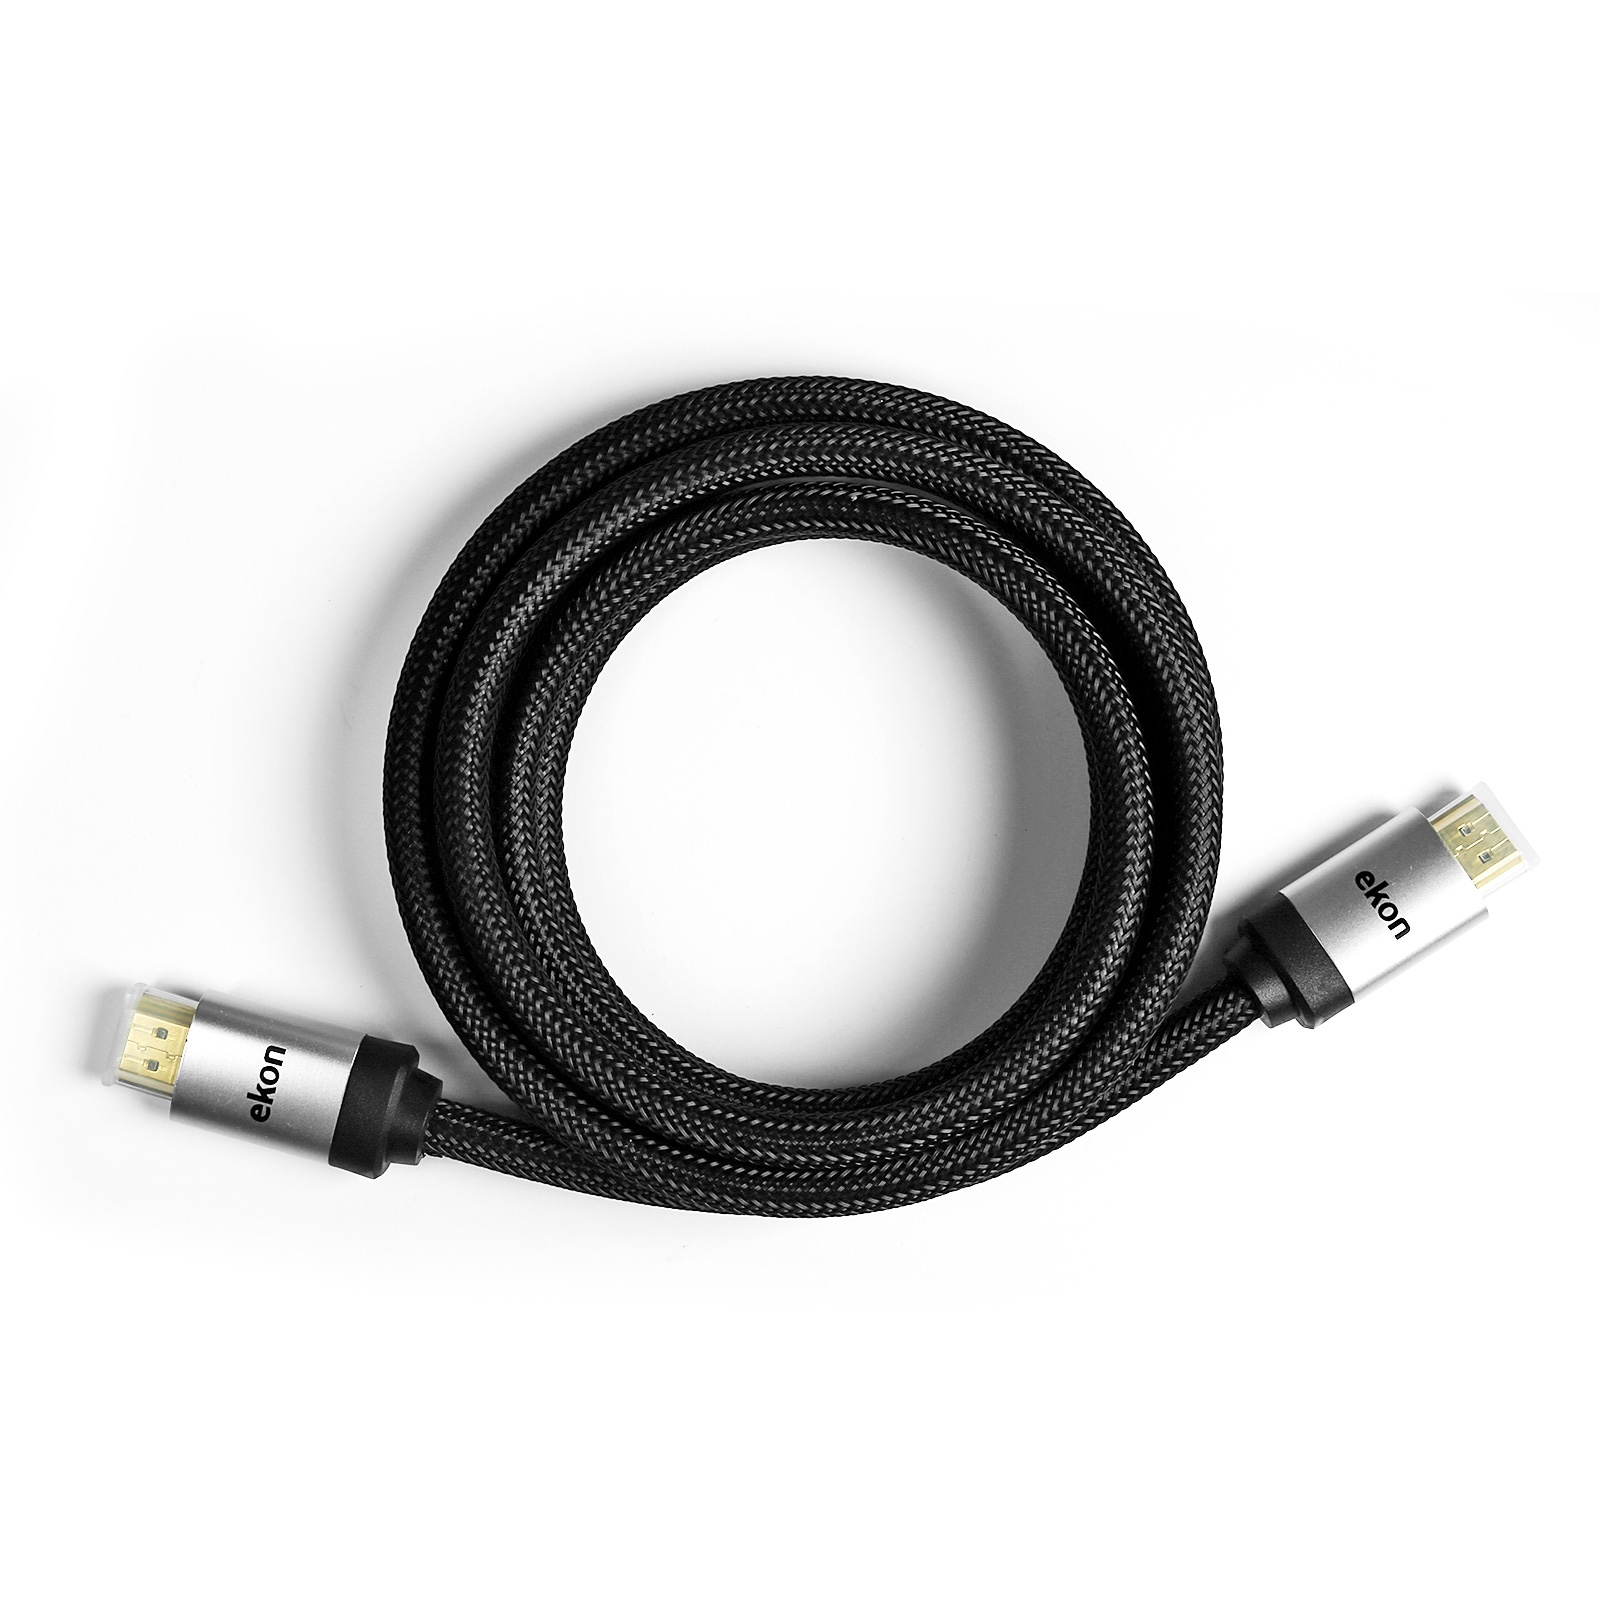 EKON HDMI V 1.4 cable male to male high speed with ethernet. OD 6.0mm.  Conductor pure copper,30 AWG, jacket black color. Connector PVC black  color and gold plated. Shielding: Al-foil with al-mg braid. + ferrite core. Total Lenght 3.0  mt